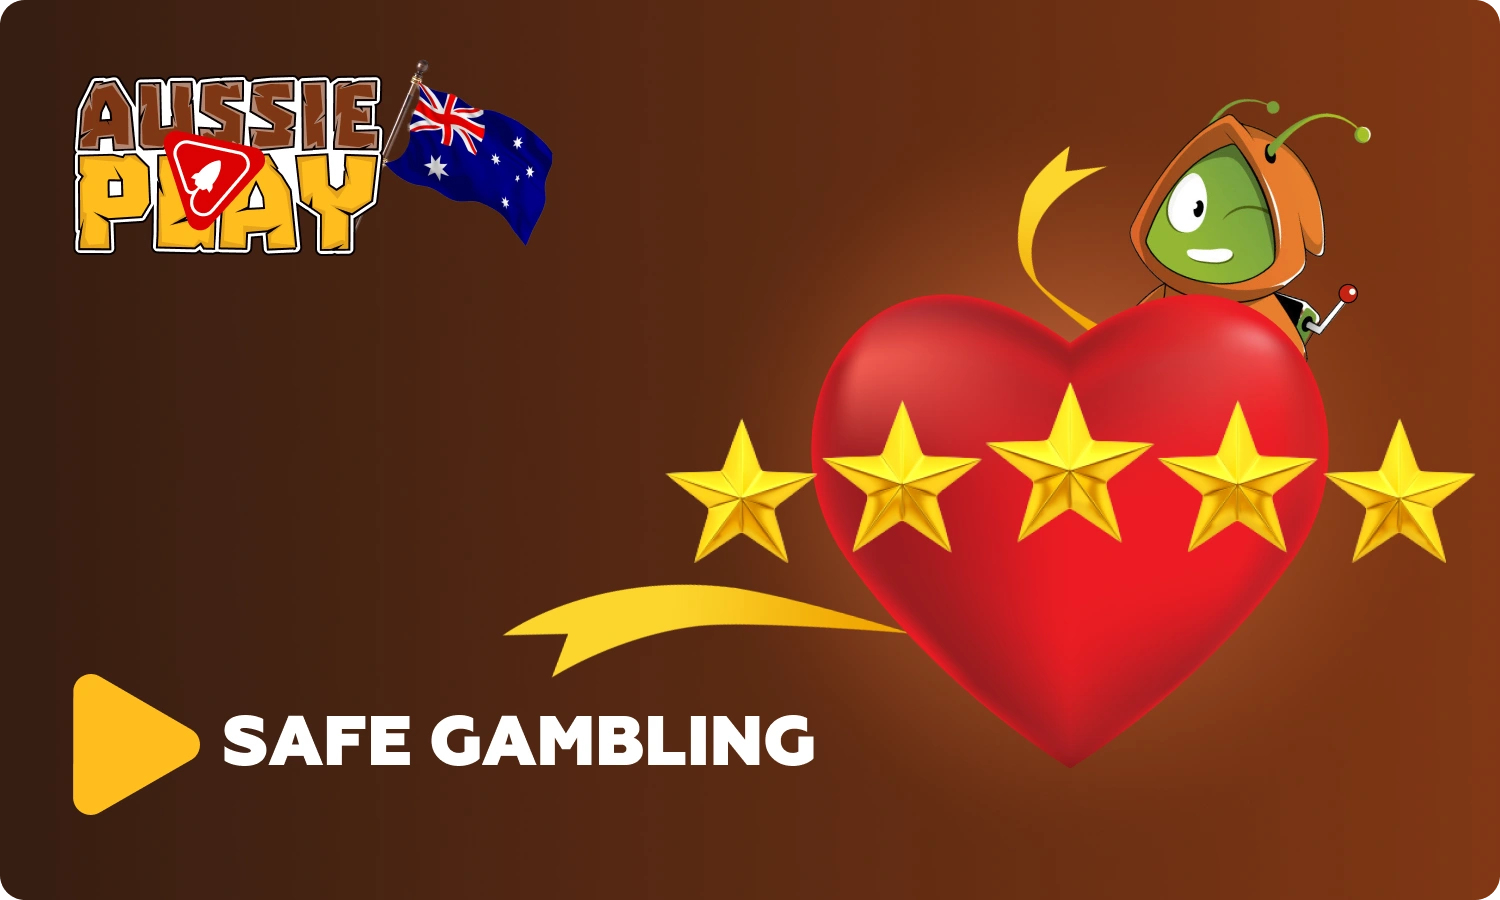 Aussie Play encourages responsible gambling and employs a range of measures to help Australian players control their gambling habits